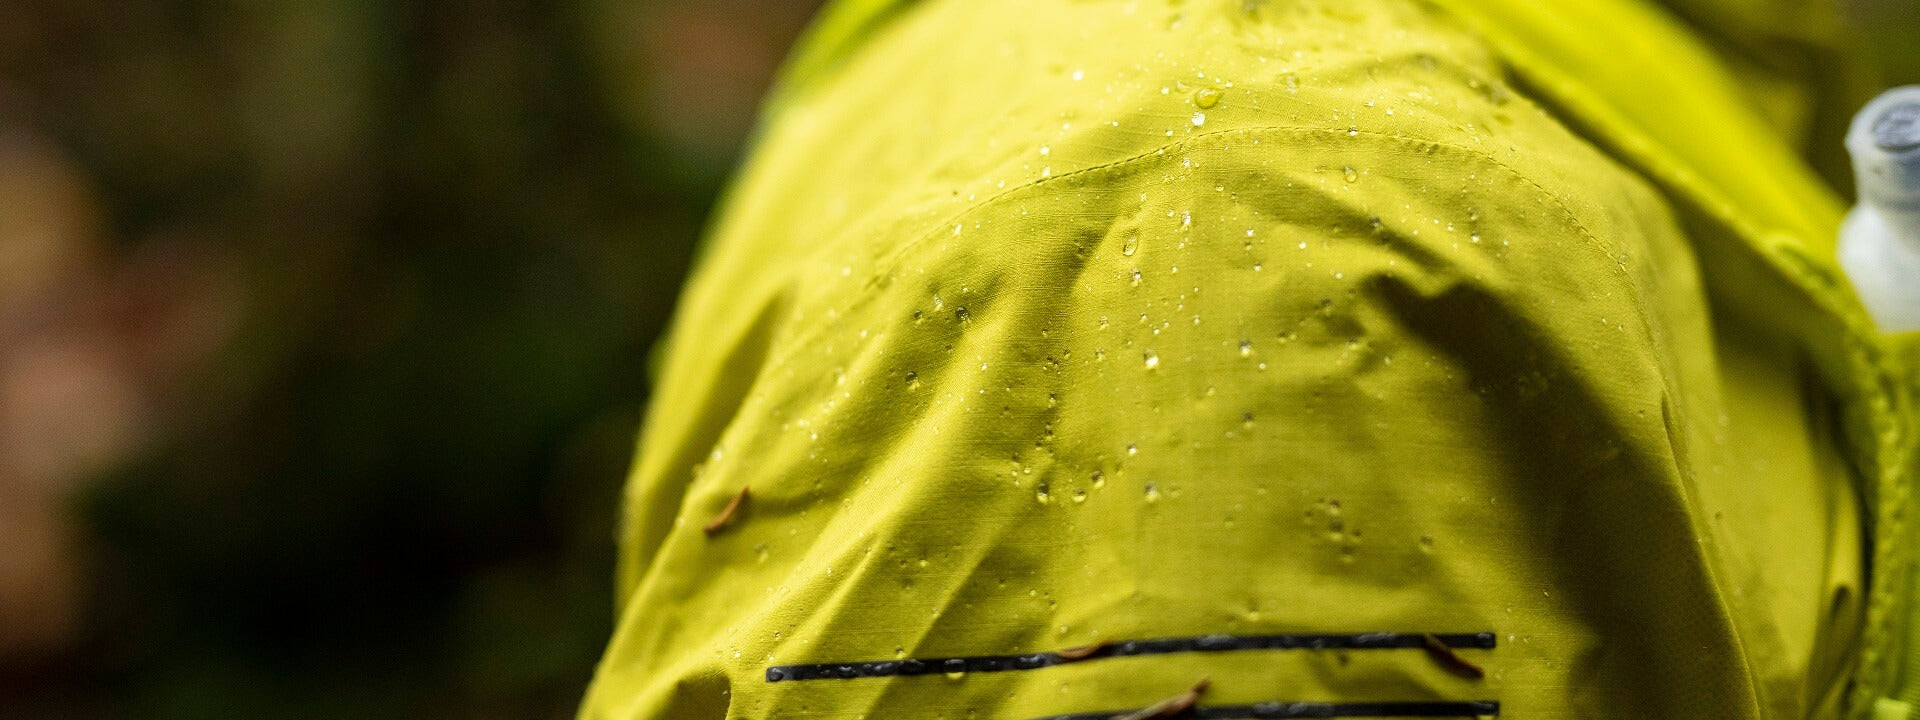 HOW TO WASH GORE-TEX CLOTHING AND RESTORE DURABLE WATER REPELLENCY (DW